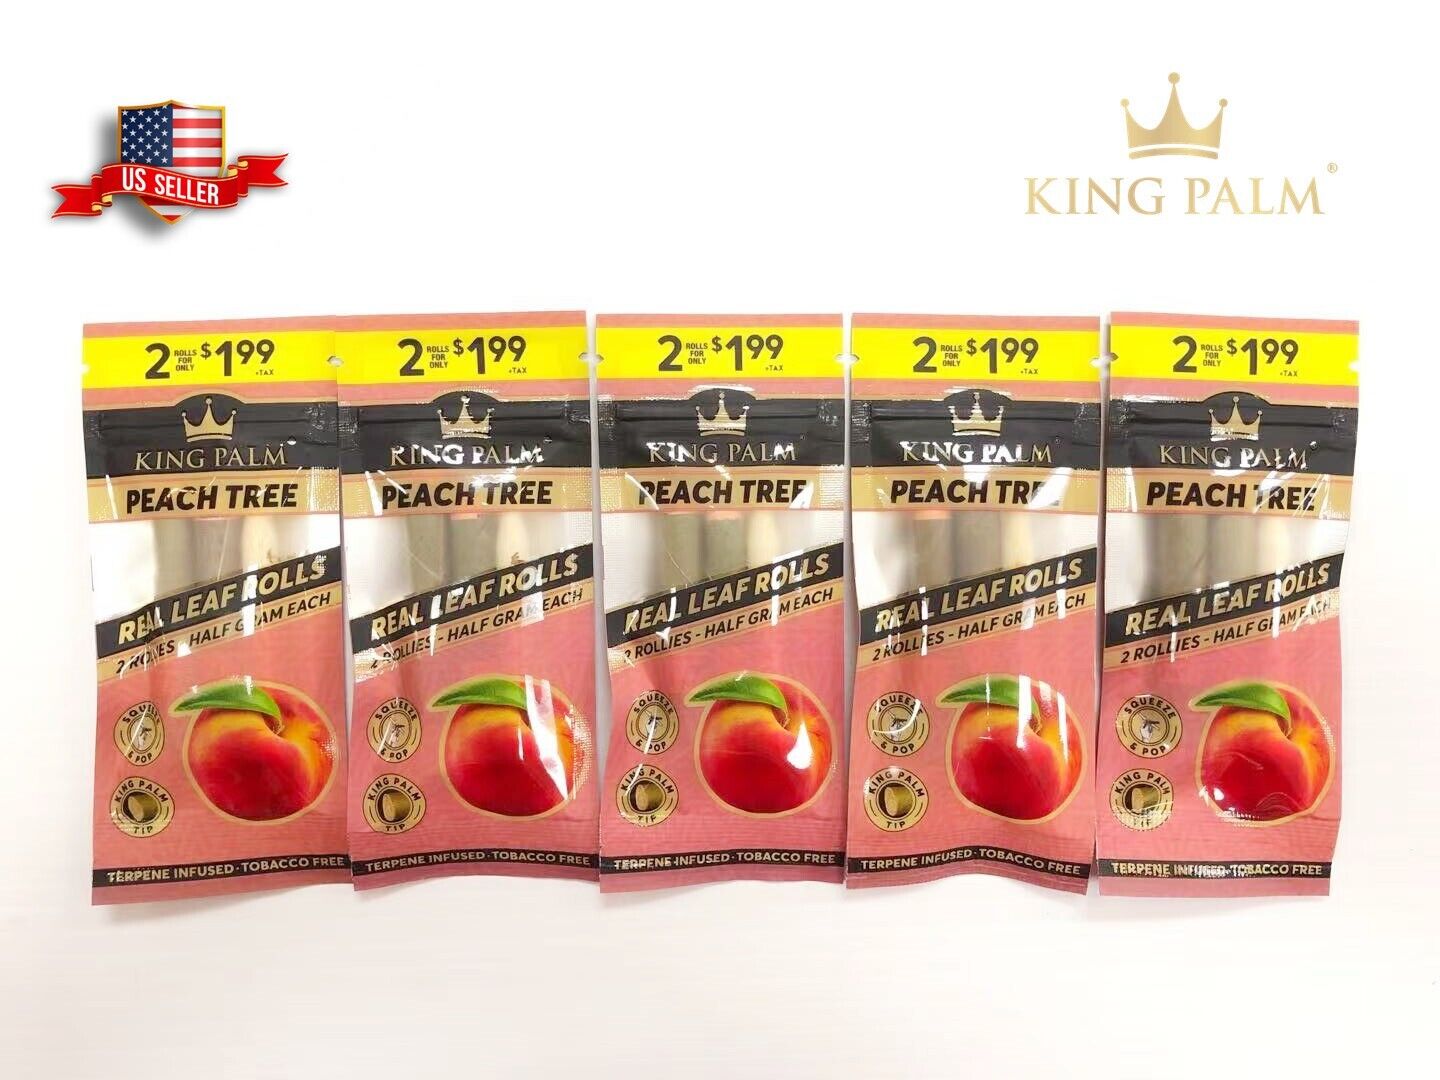 NEW KING PALM PEACH TREE FLAVOR 100% REAL LEAF ROLLS ROLLIES SIZE 5 PACKS